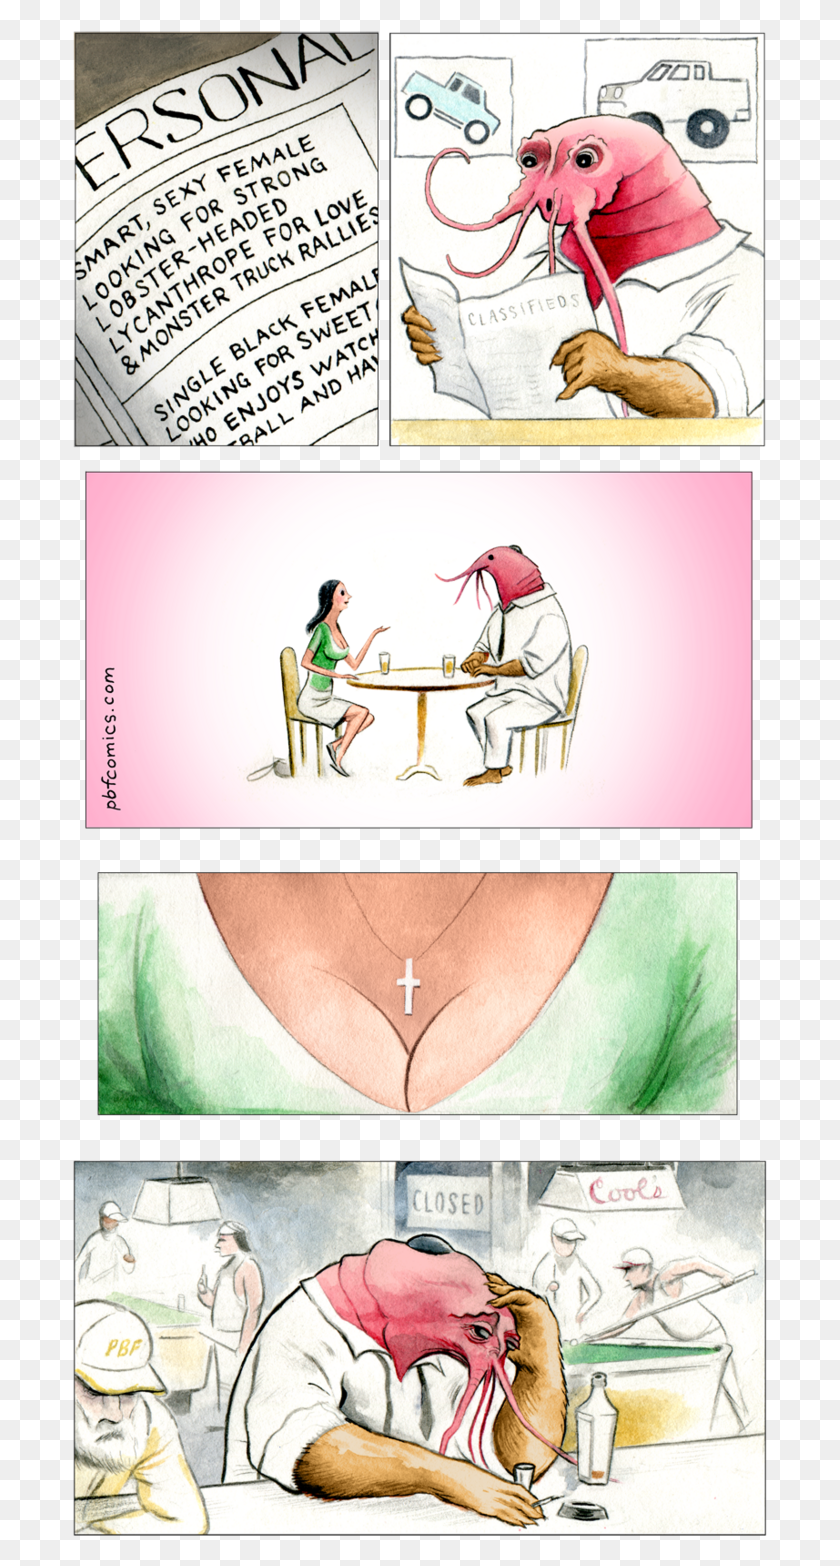 695x1506 Descargar Png Forever Alone Forever Alone Perry Bible Fellowship, Persona, Humano, Perro Hd Png